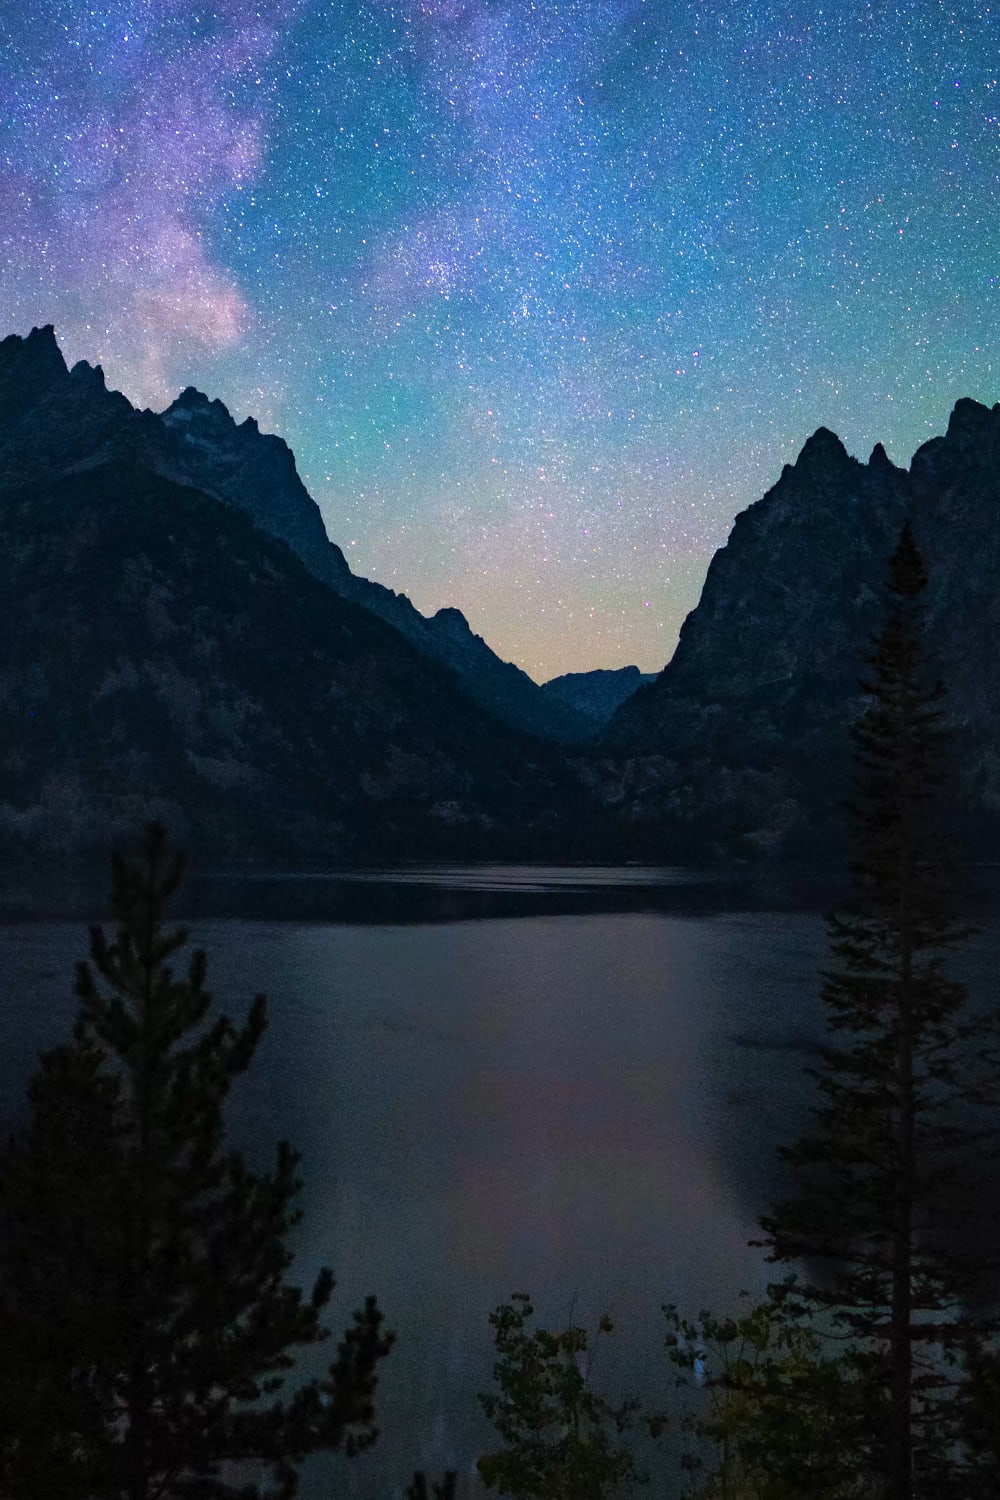 I left my camera running at Jenny Lake (Grand Teton National Park) at night and captured our home galaxy reflecting off the water!